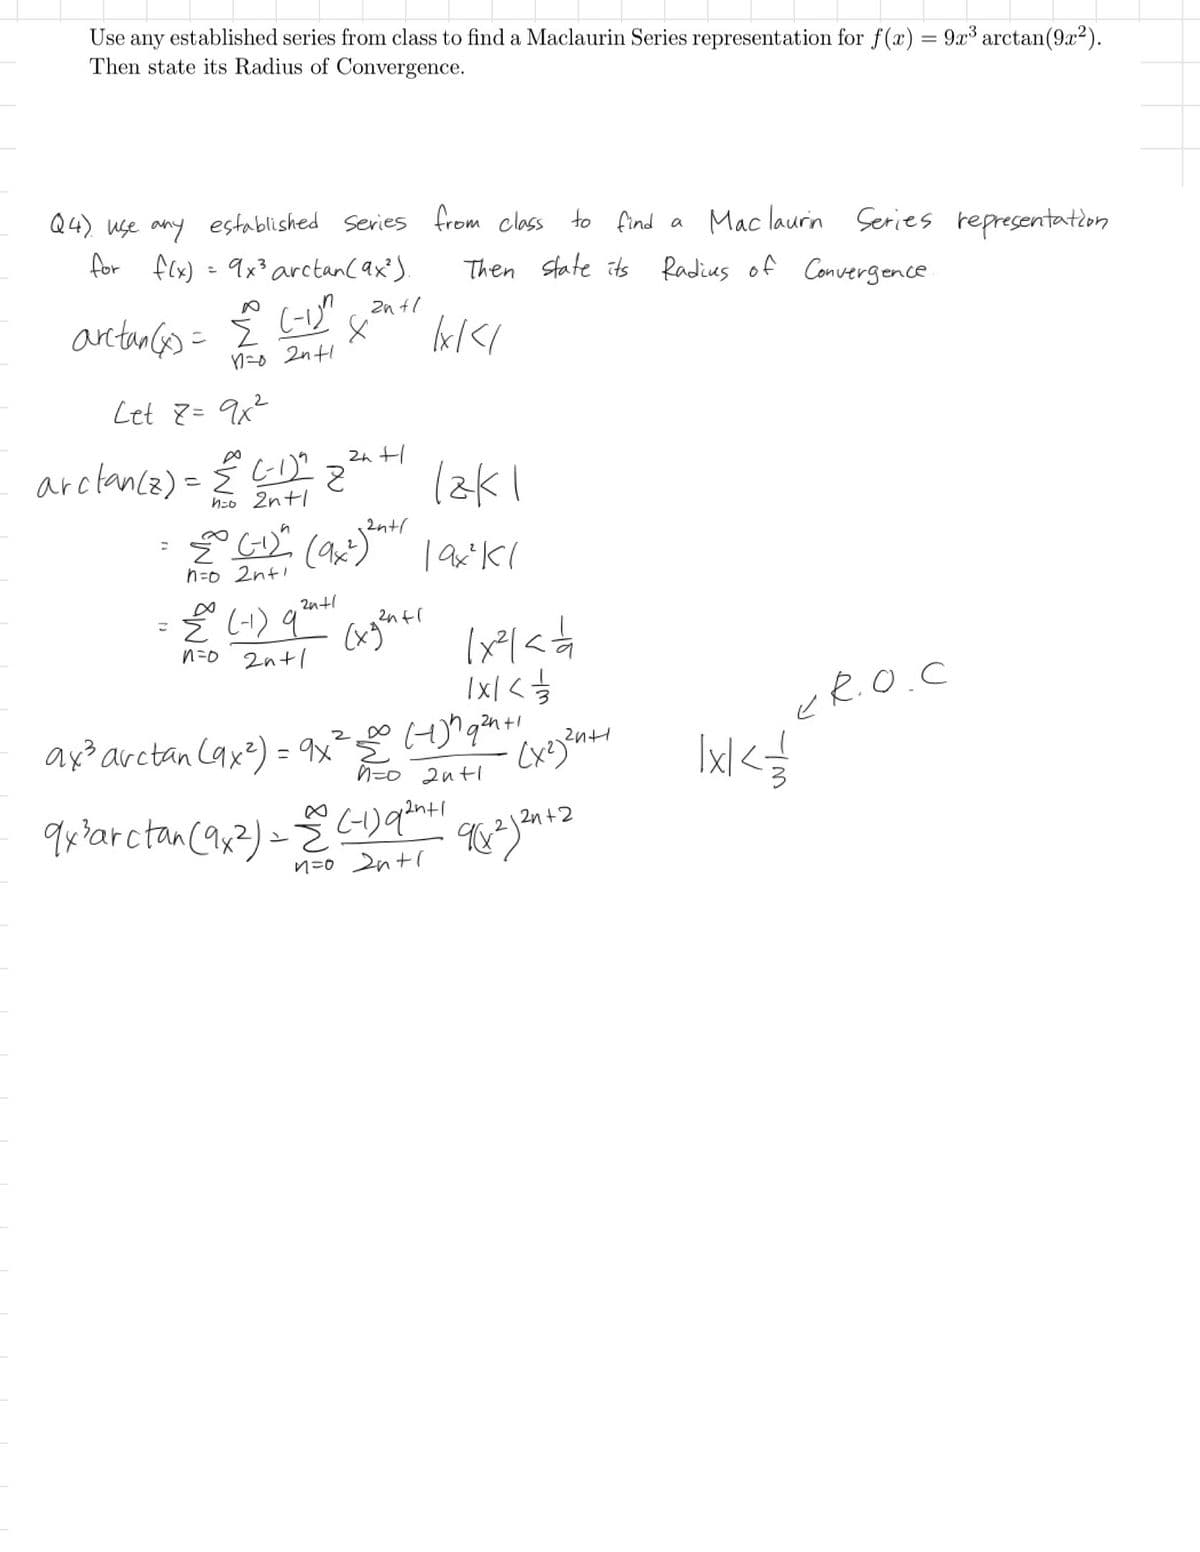 Use any established series from class to find a Maclaurin Series representation for f(x) = 9x³ arctan (9x2).
Then state its Radius of Convergence.
Q4) use any established Series from class to find a Maclaurin Series representation
Then state its Radius of Convergence.
for f(x) = 9x³ arctan (9x²).
arctan(x) = Σ
(-1)^
n=o 2n+1
Let Z= 9x²
arctance) Ci
こ
=
=
h=0 2n+1
Z
2n+1
= (-1) (9x²) 2n+1
n=o 2n+1
을
lx/</
12k1
19x²Kl
€ (-1) qut (xg2n+1 (x²laá
n=0 2n+1
(xgenti
1 x < 1/1/13
2n+1
= 9x ² 500 (+1) ^ q² + 1 x 2 2n+1
ax³ arctan (9x²) = 9x² =
n=0 2n+1
9x ³arctan (9x2) = (-1) 92+1
1
n=o 2n+1
Схезчин
982) 2n+2
ER.O.C